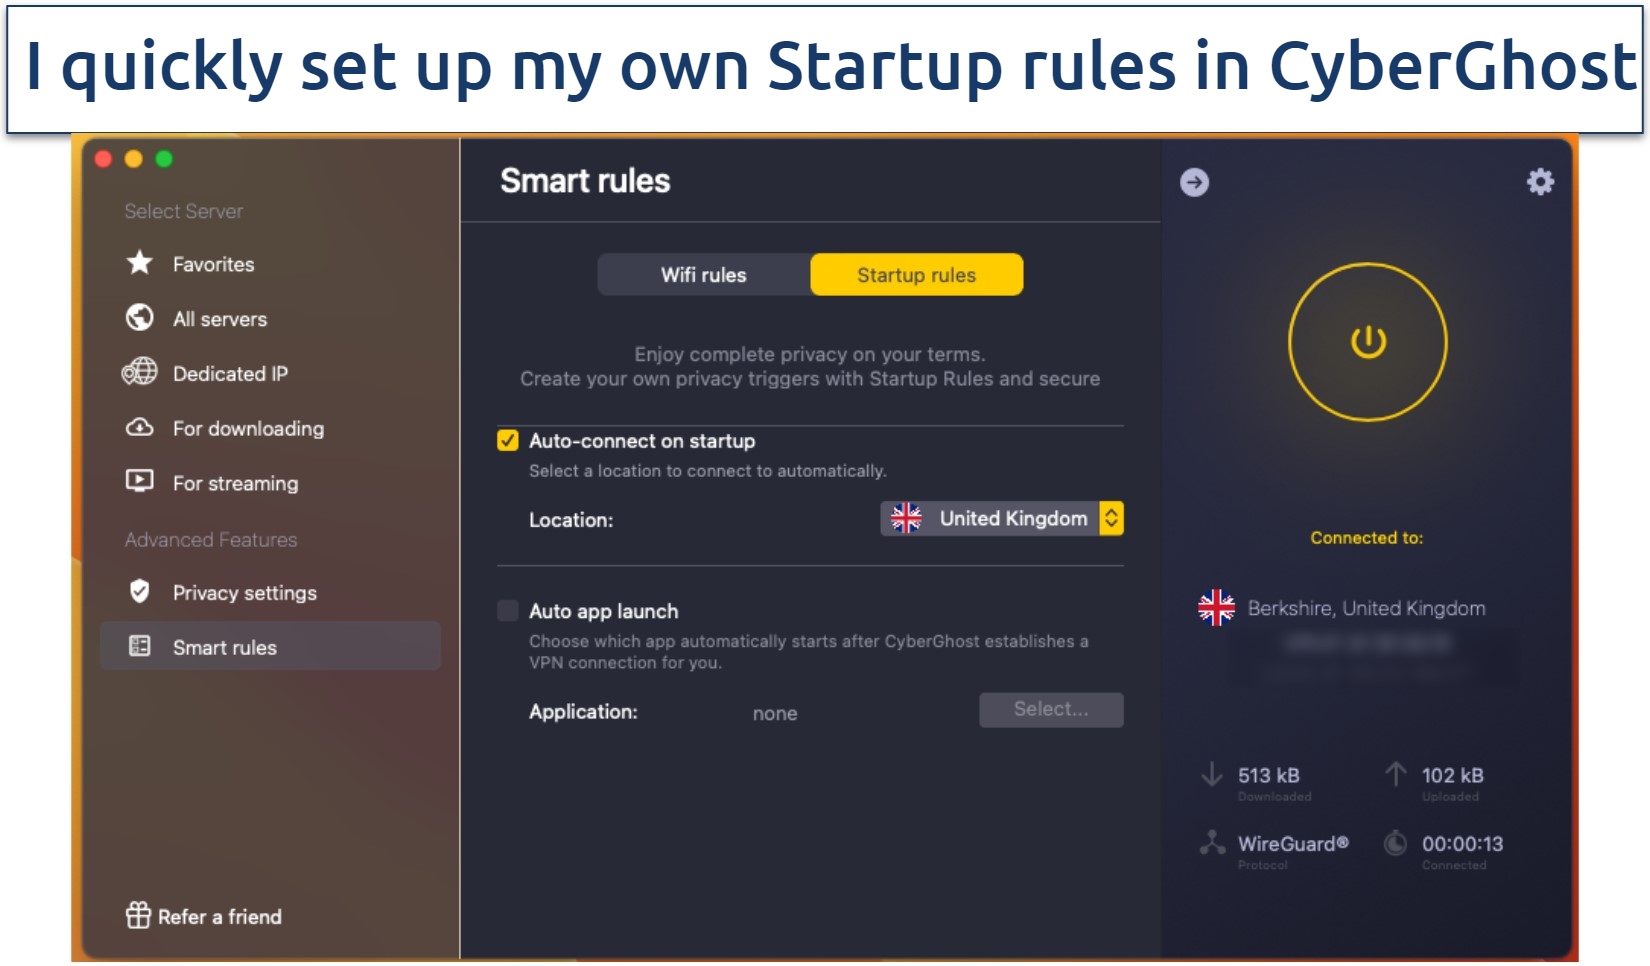 Screenshot of the CyberGhost's Smart Rules in the settings